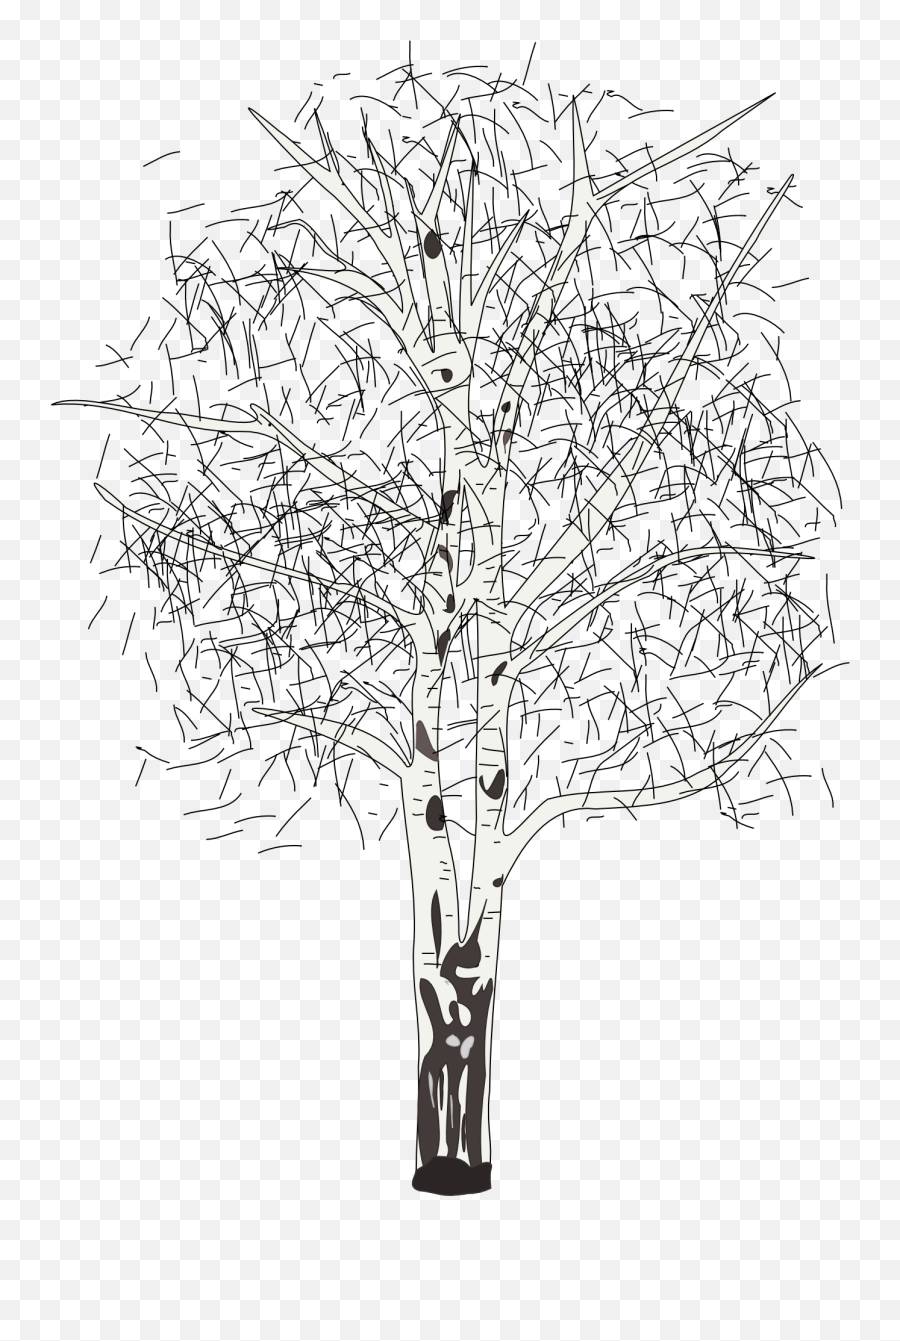 Drawing Birch On A White Background Free Image Download - Birch Emoji,Forest Clipart Backgrounds